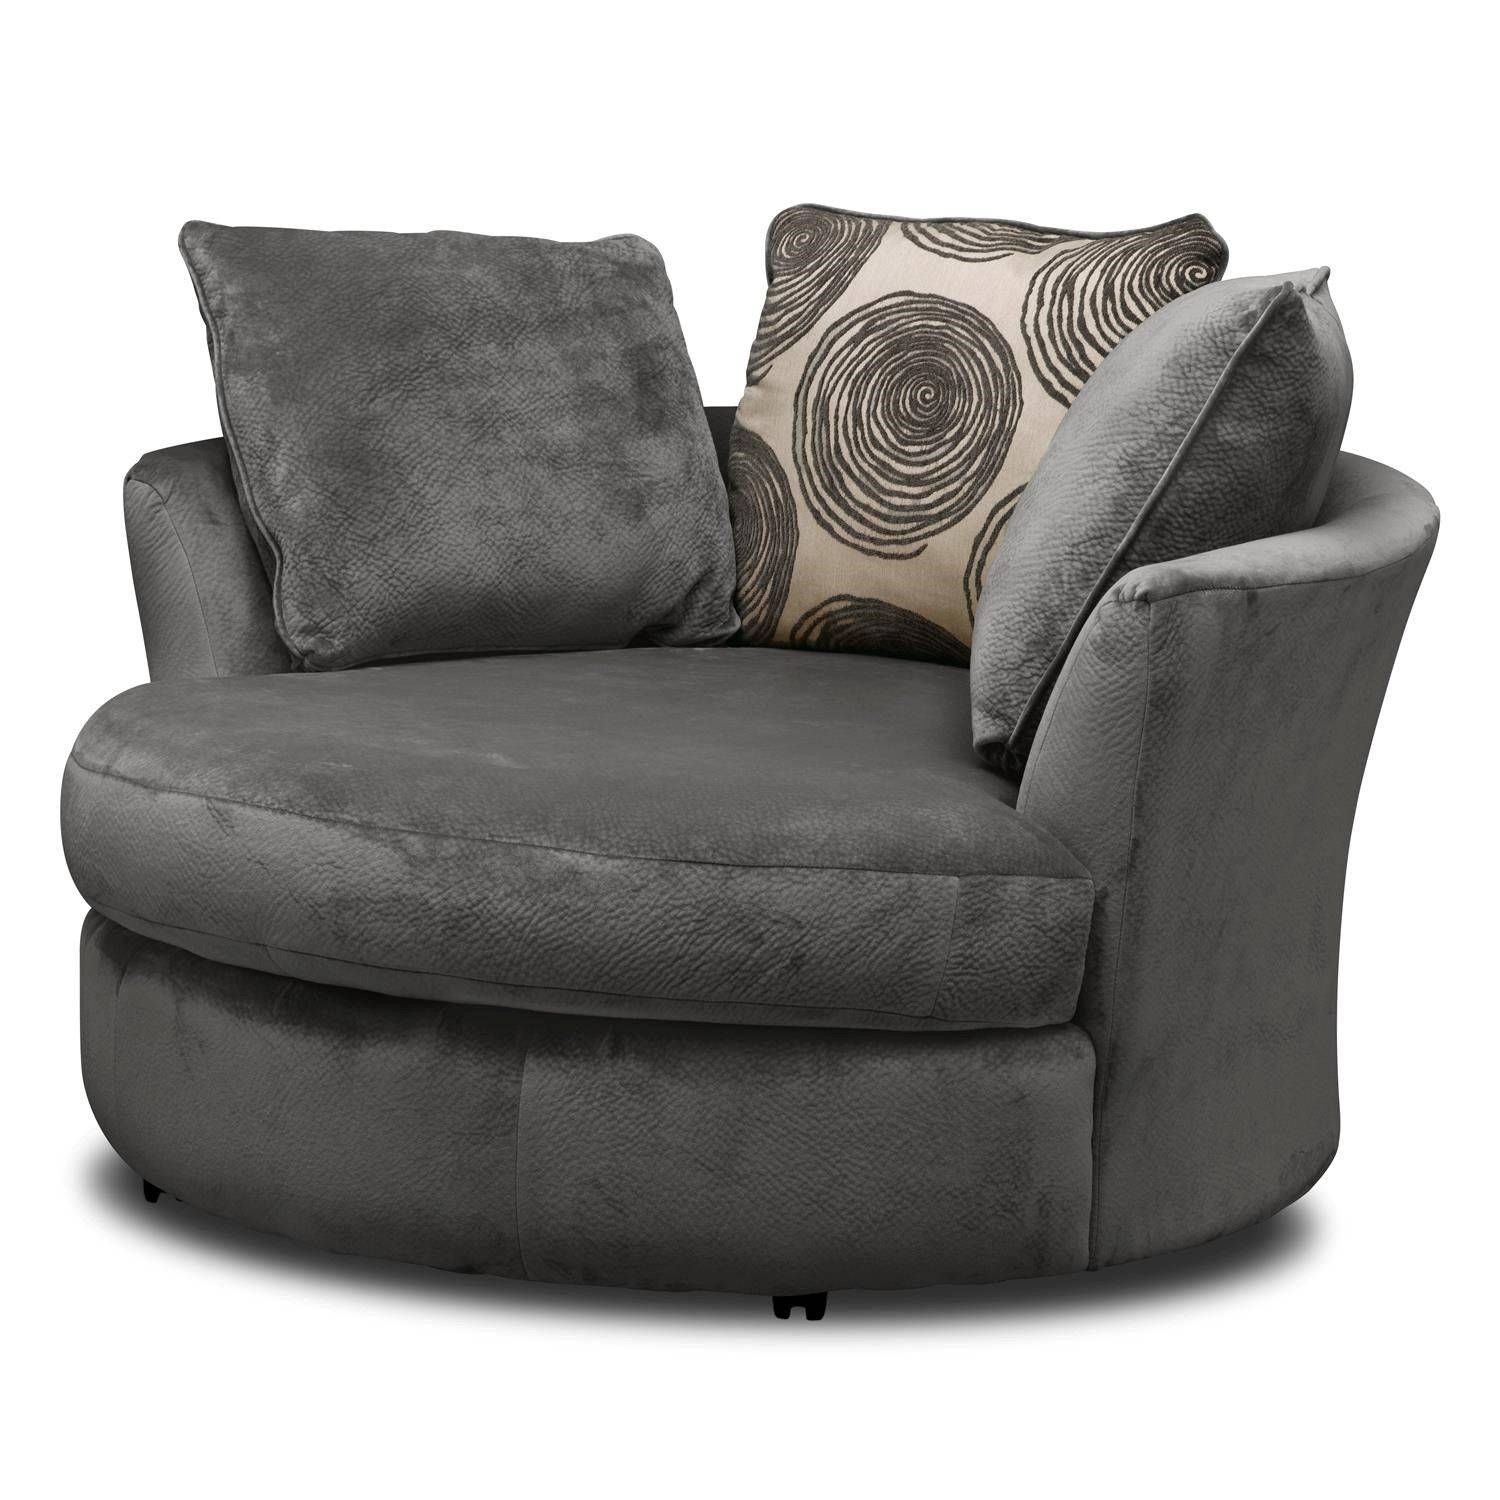 Lovely Swivel Sofa Chair 45 On Living Room Sofa Inspiration With Throughout Round Swivel Sofa Chairs (View 27 of 30)